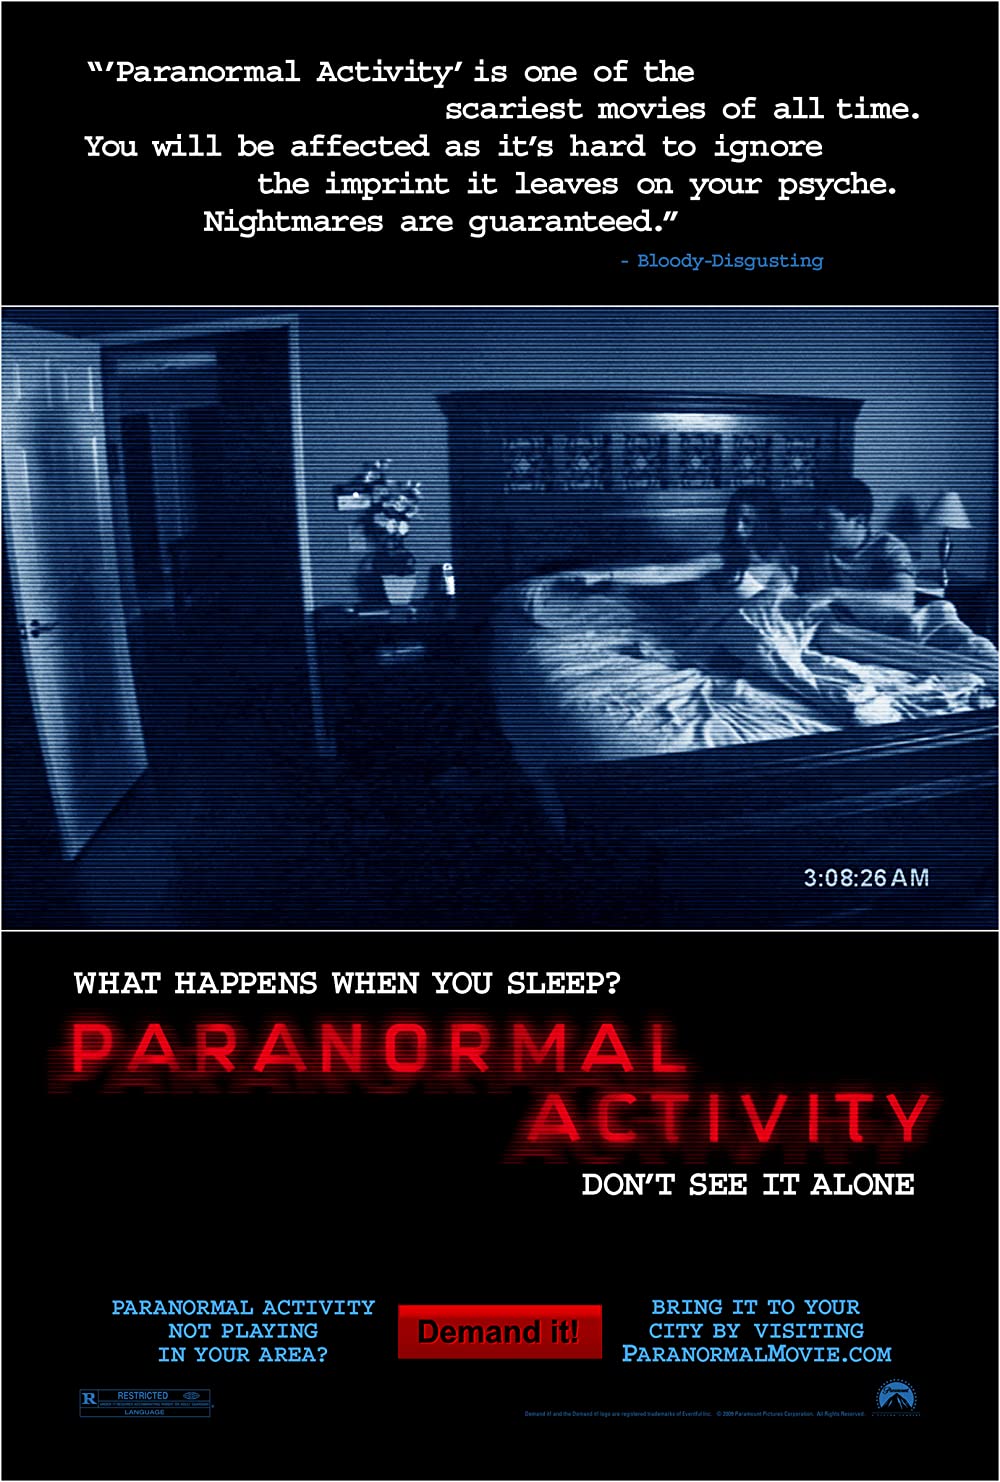 Paranormal-Activity-scary-movies